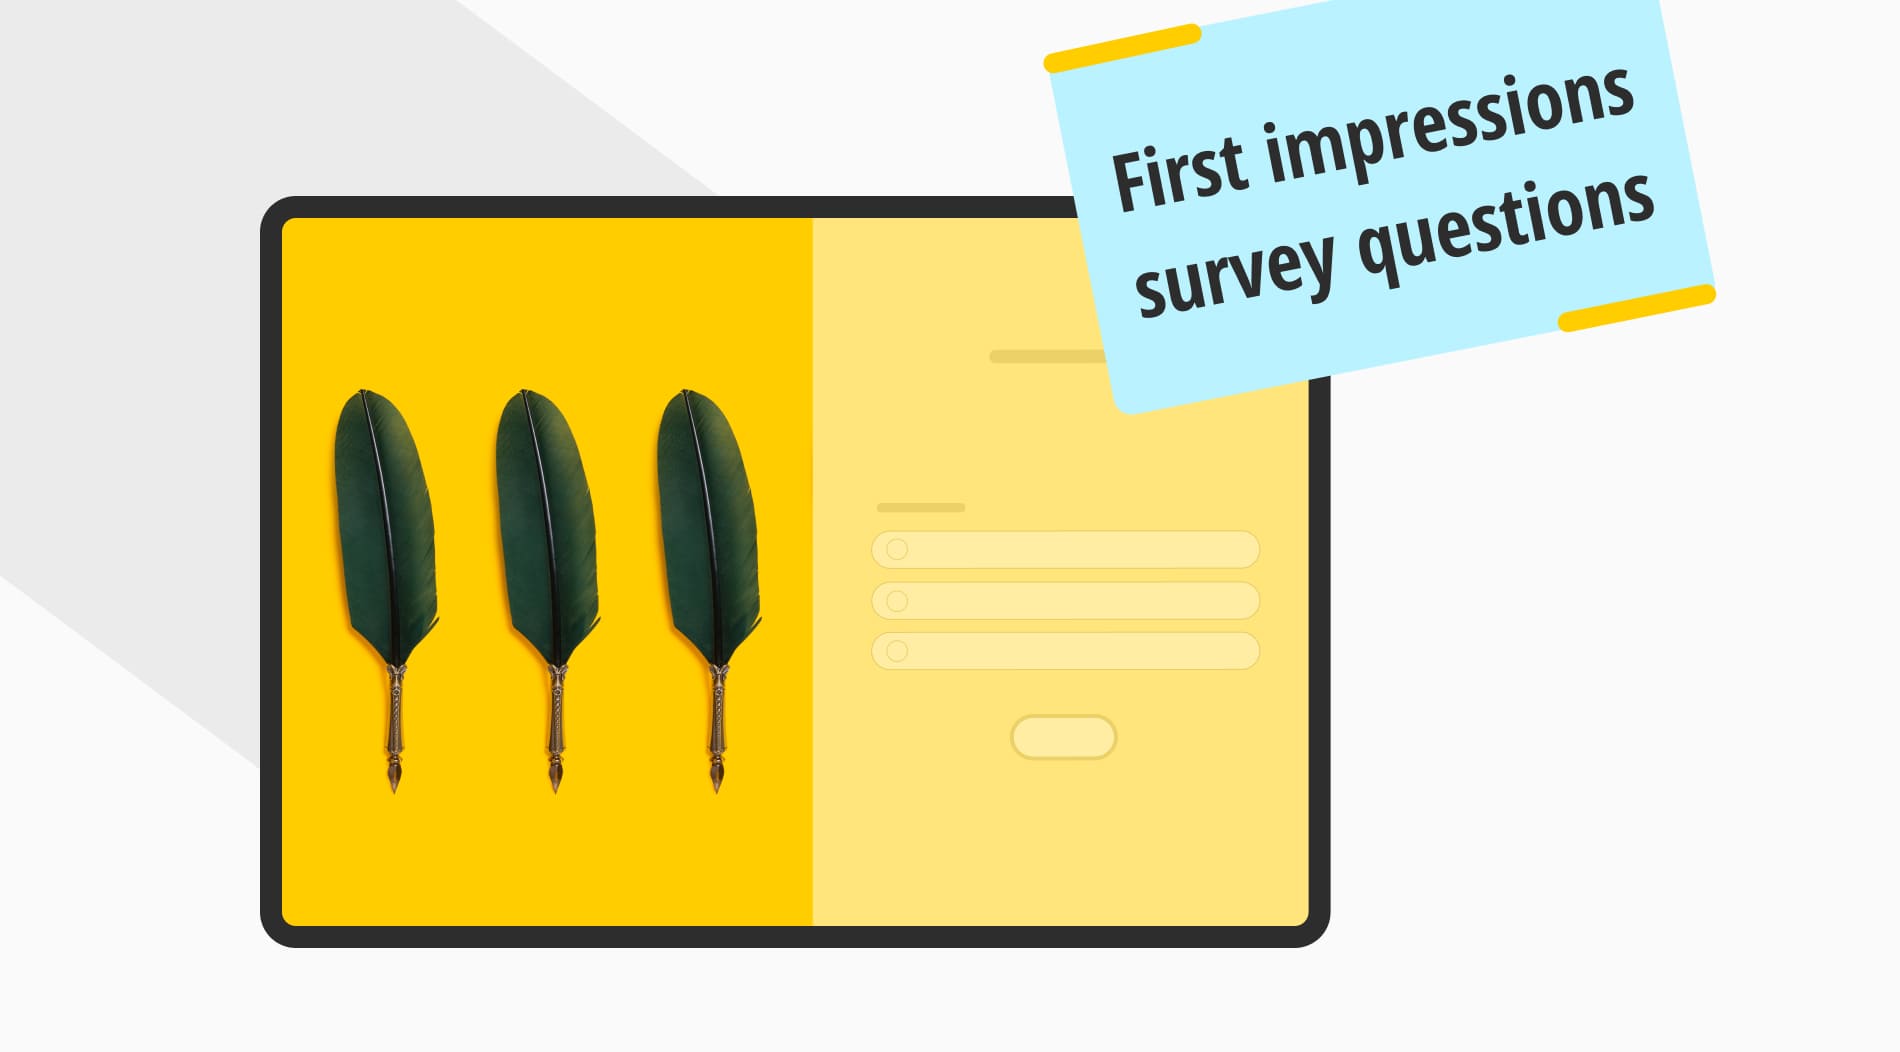 20+ First impressions survey questions for your website